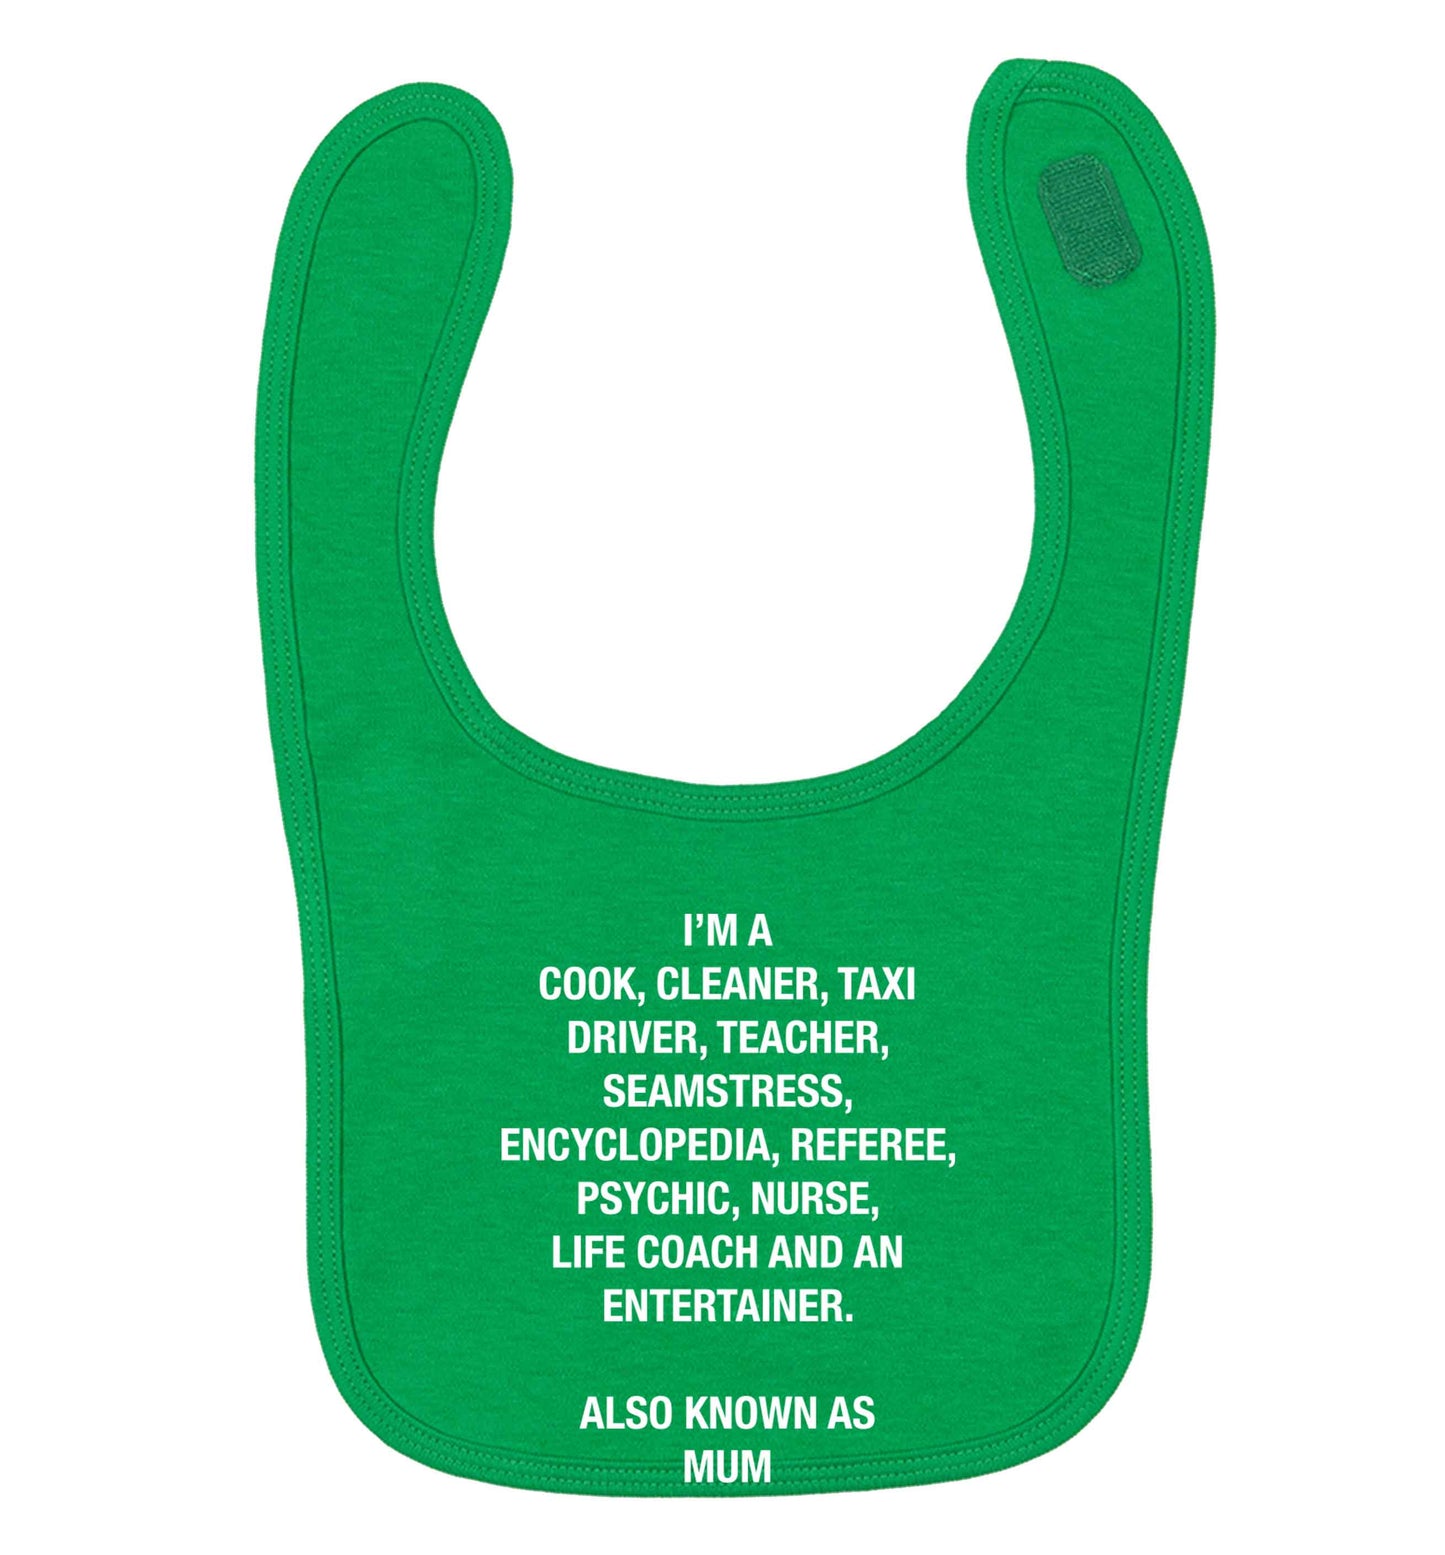 Funny gifts for your mum on mother's dayor her birthday! Mum, cook, cleaner, taxi driver, teacher, seamstress, encyclopedia, referee, psychic, nurse, life coach and entertainer green baby bib